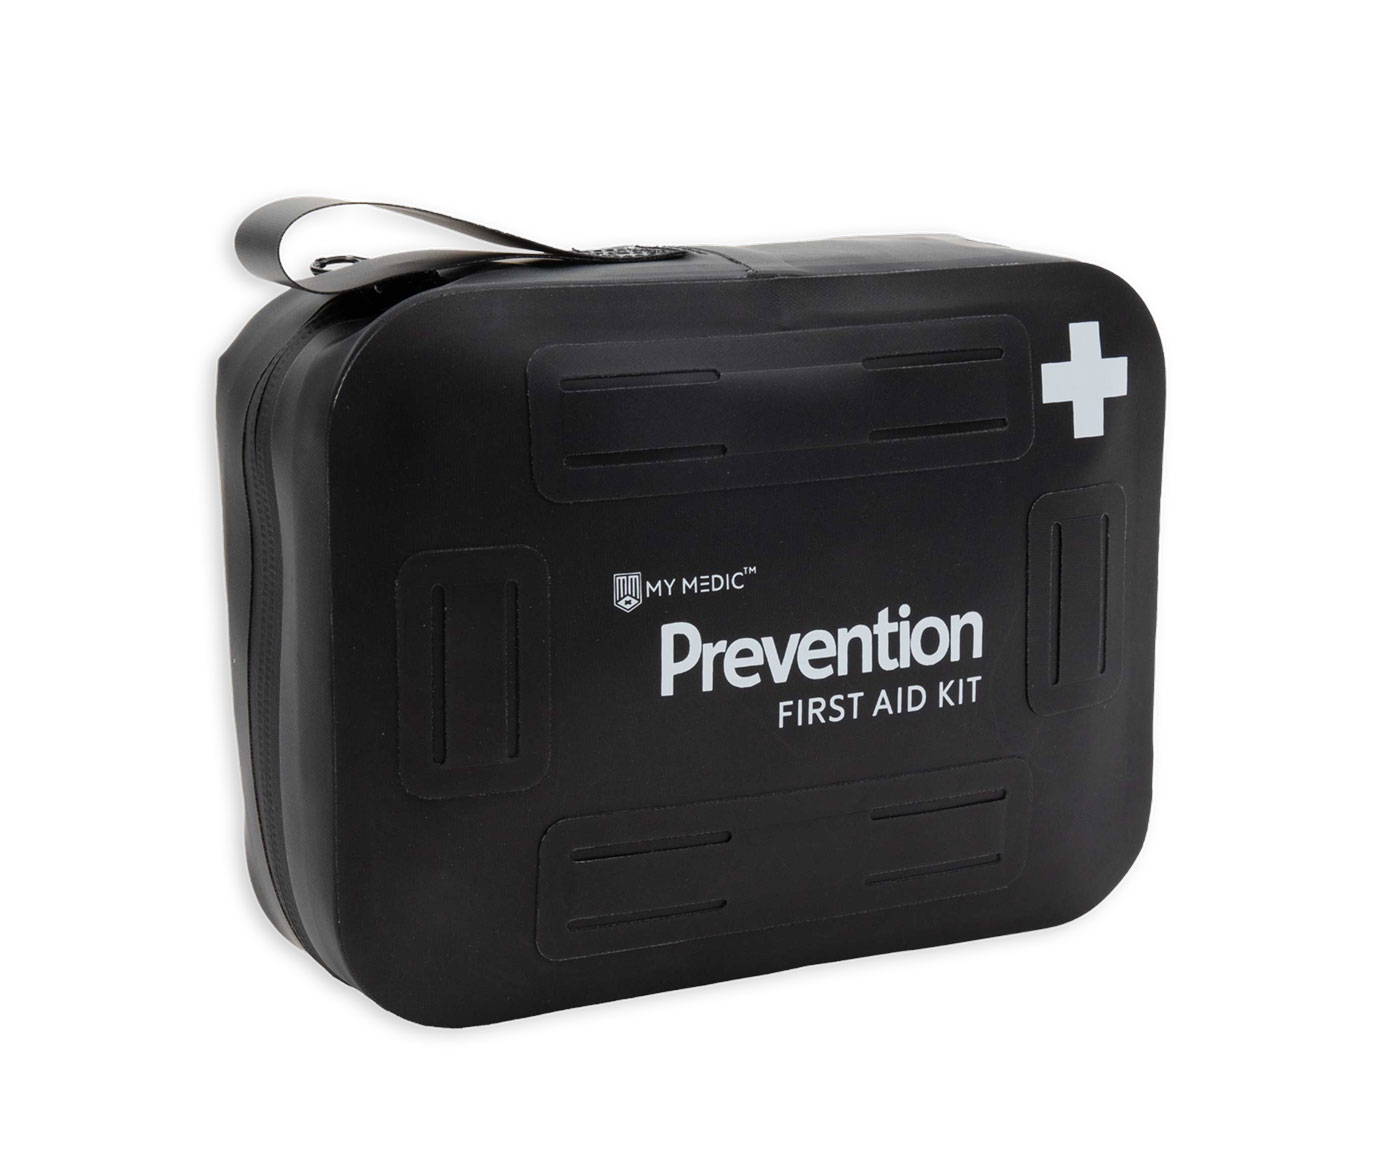 Prevention first aid kit black